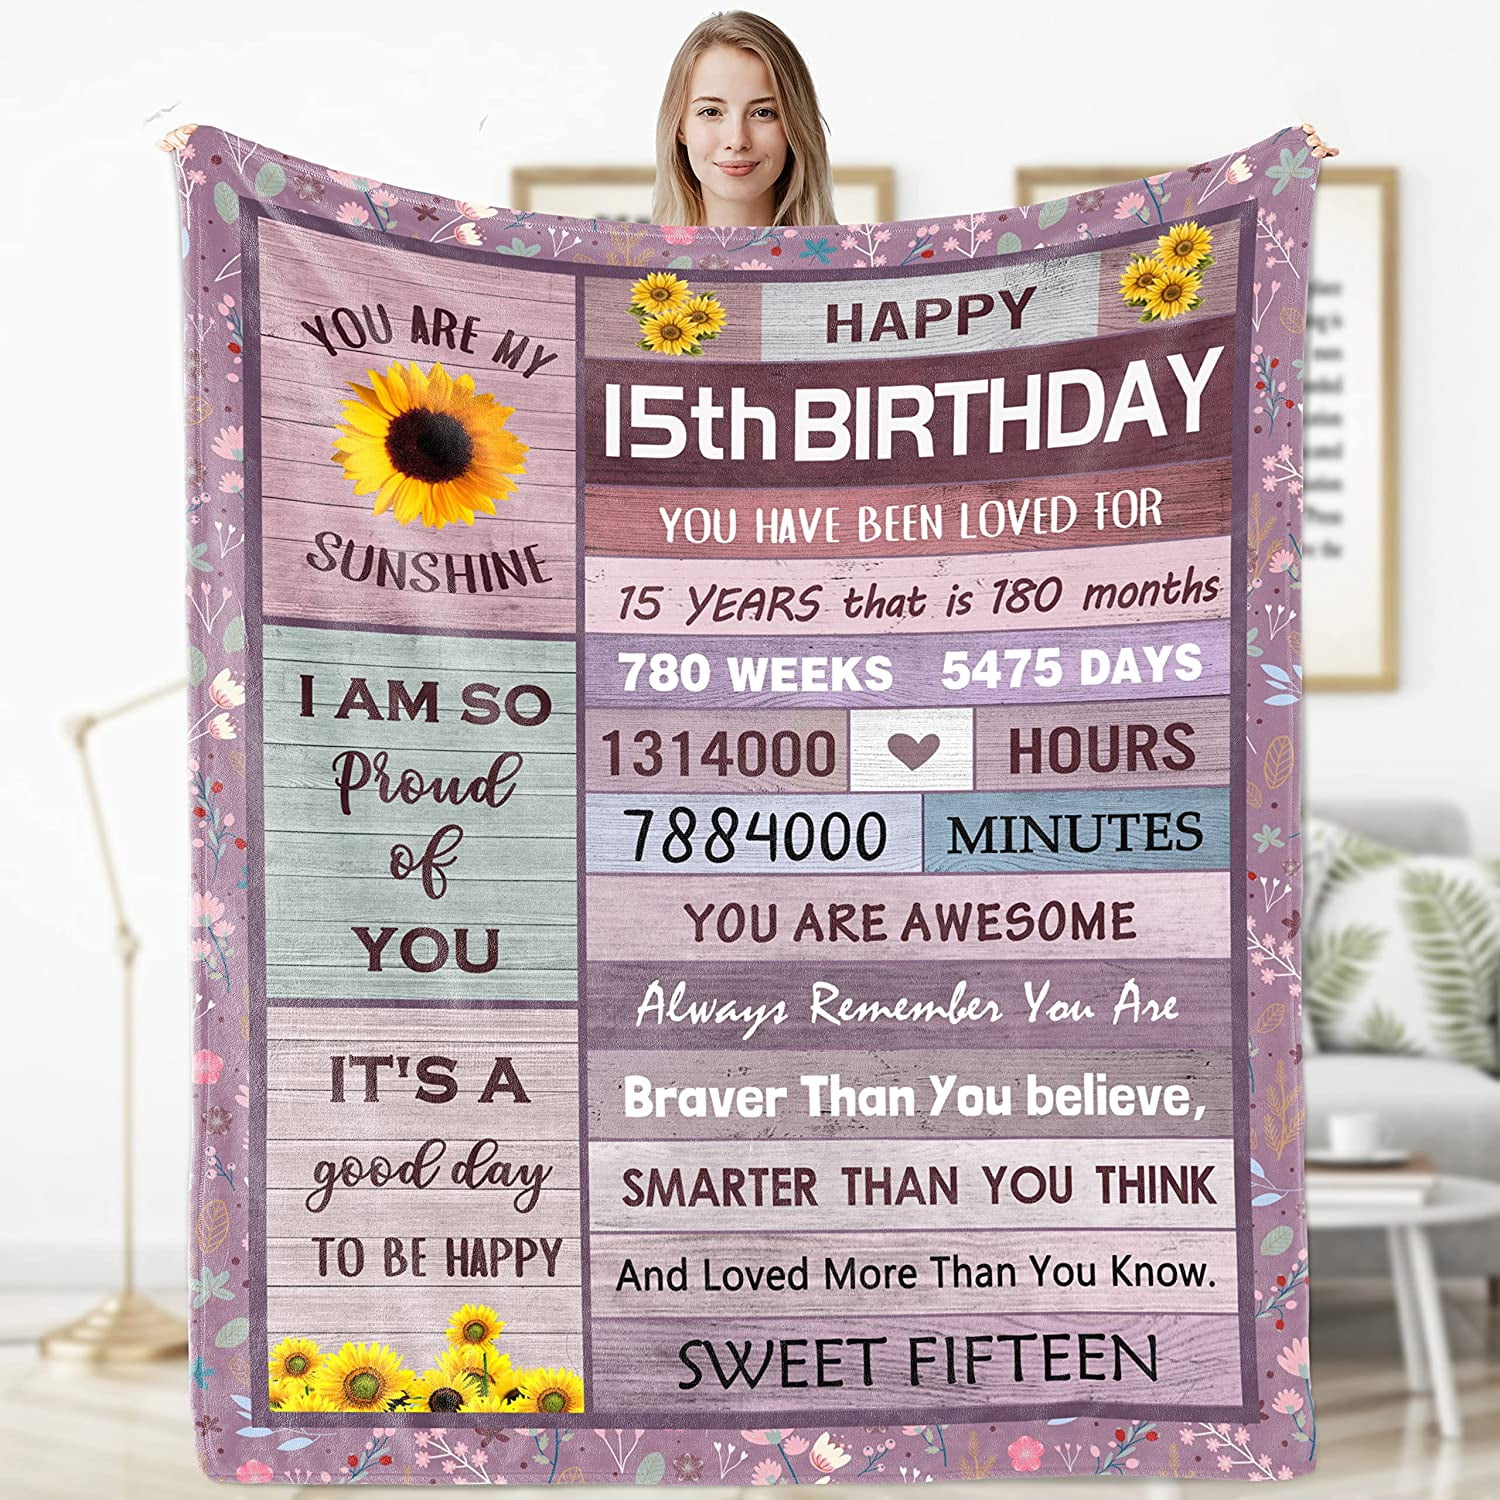 35 Best Birthday Gifts for 12 Year Olds Girl that Will Surprise Your  Princess – Loveable